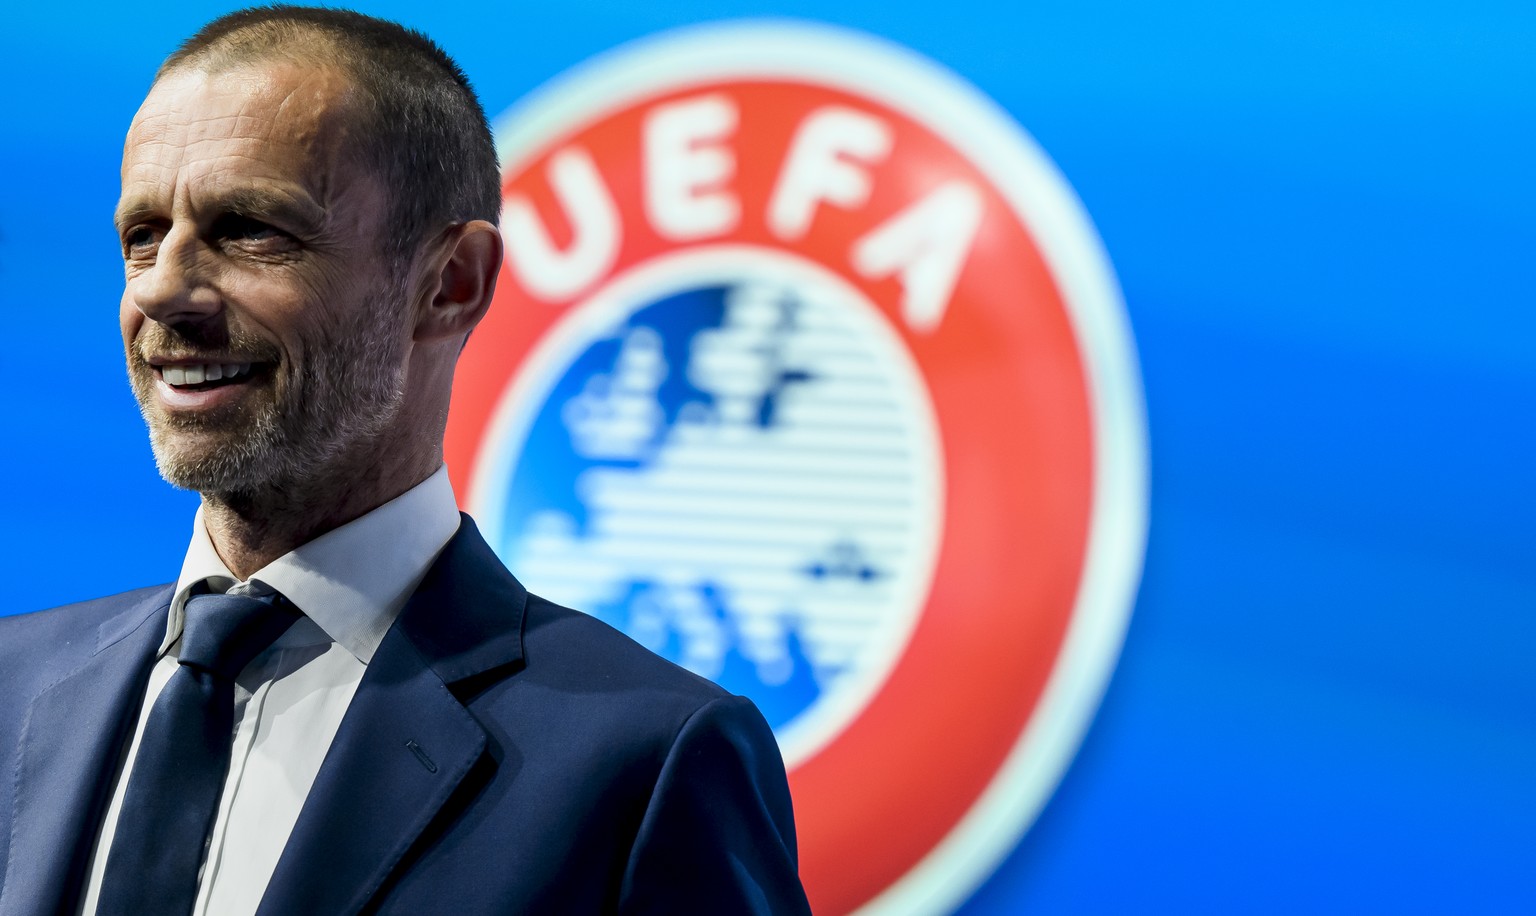 UEFA president Aleksander Ceferin reacts during a press conference after the meeting of the UEFA Executive Committee at the UEFA Headquarters, in Nyon, Switzerland, Thursday, April 7, 2022. (KEYSTONE/ ...